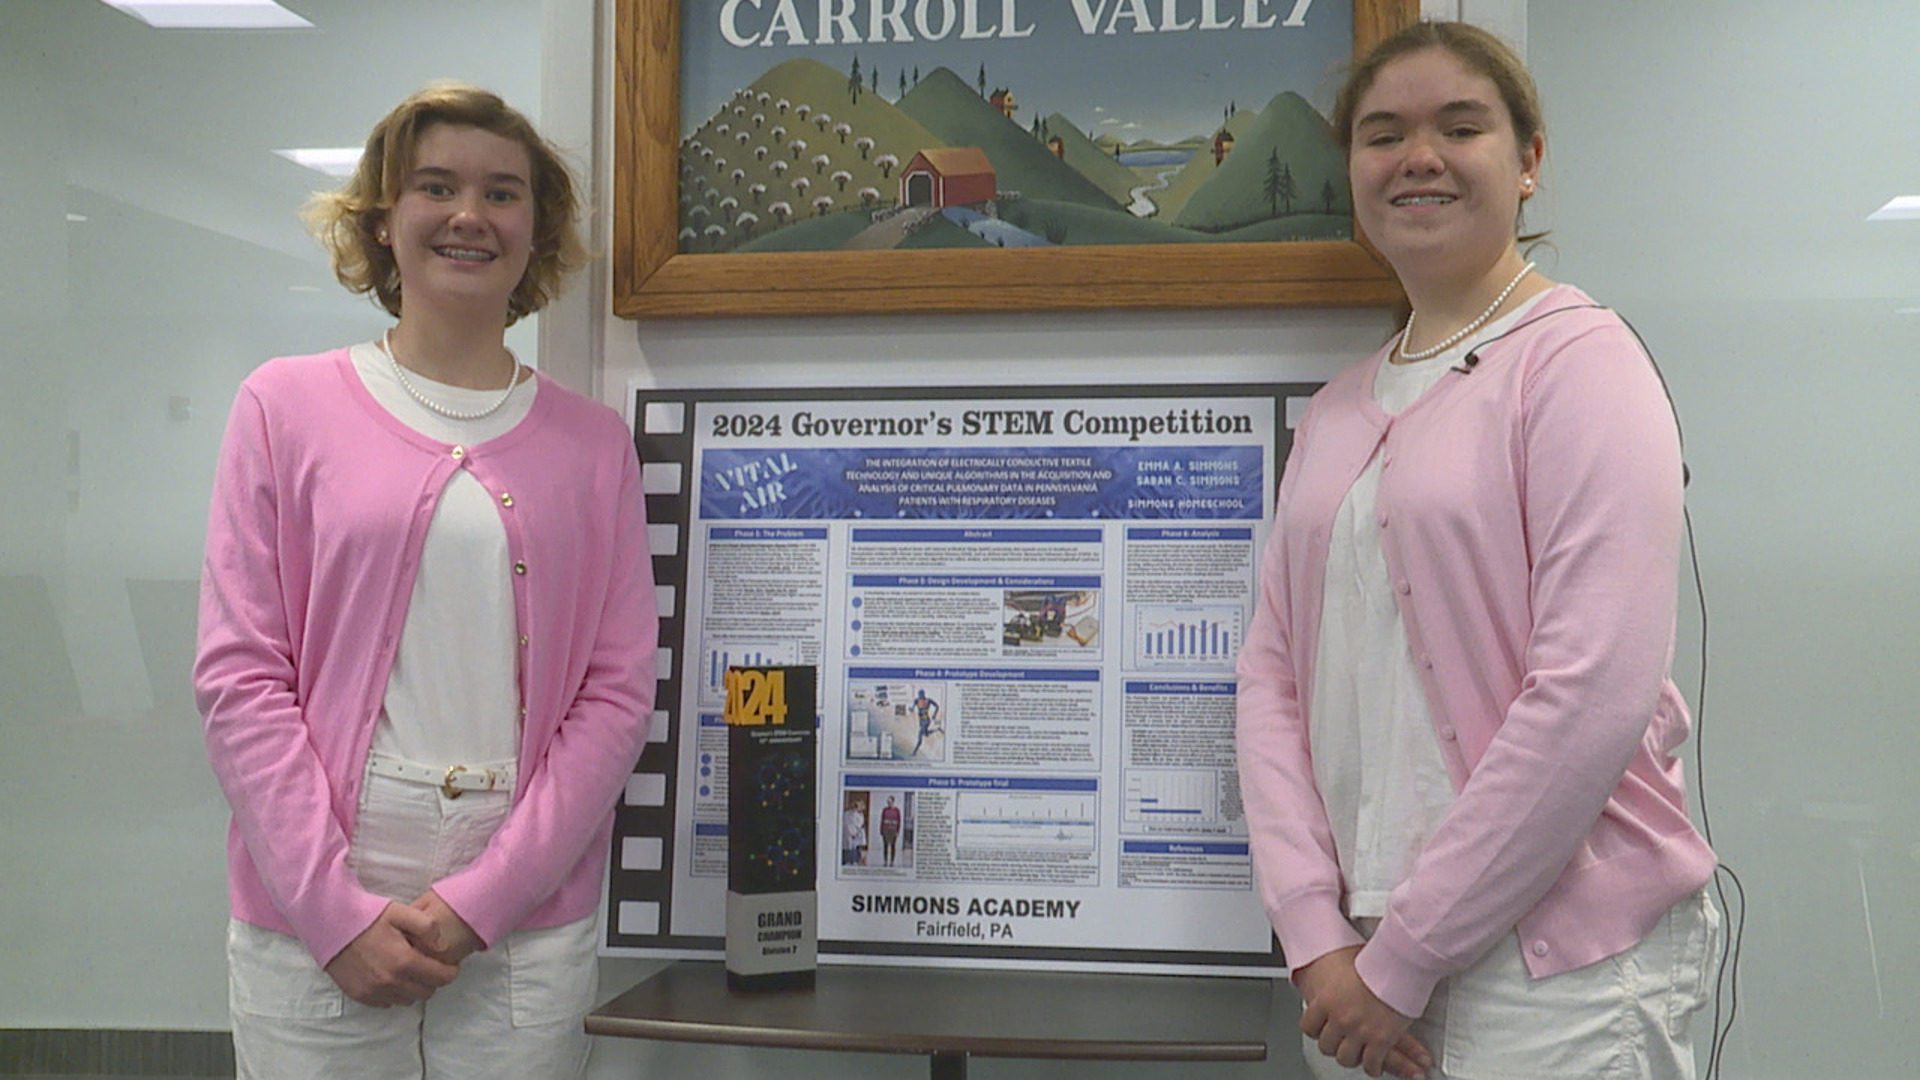 A pair of twins are the winners of this year’s Governor’s STEM competition after showcasing their project that has the potential to broaden healthcare access.